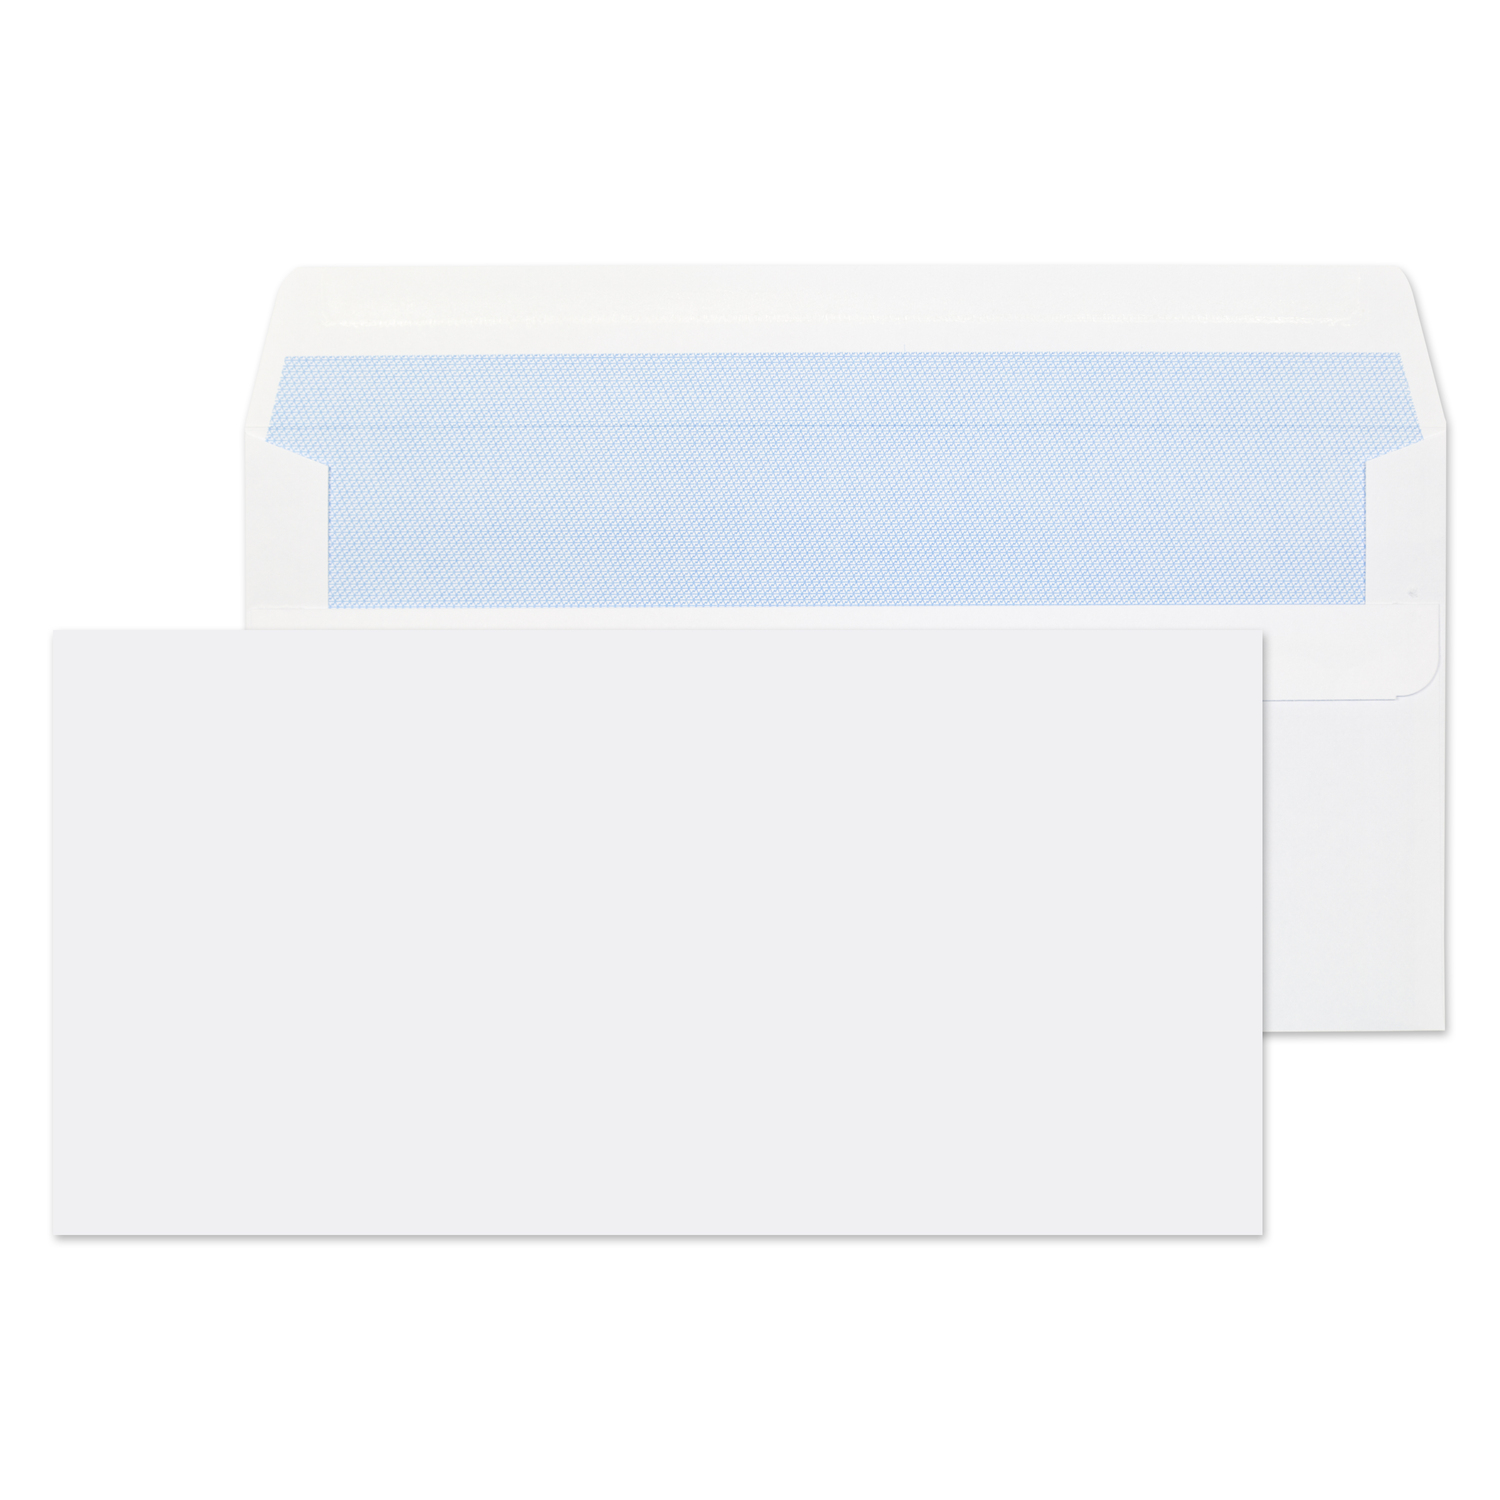 Without Window High quality White Self Seal Envelopes 80gsm /90gsm With Window 